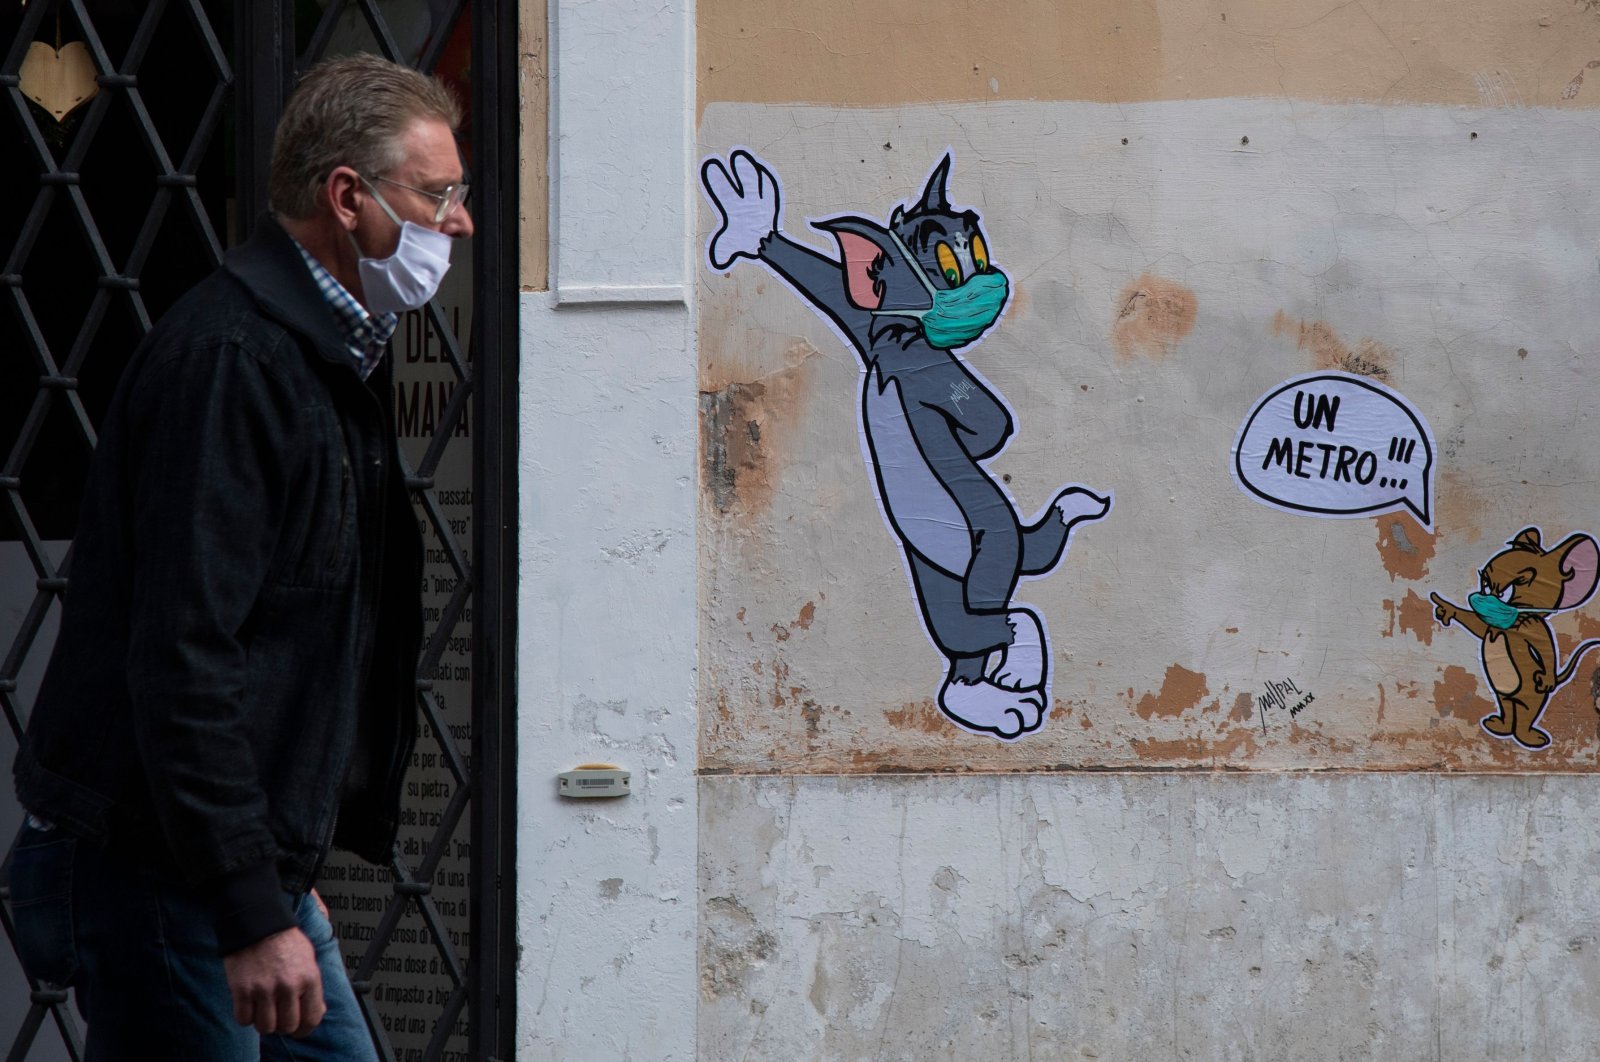 A man wearing a face mask walks past a mural by street artist Maupal, created to pay homage to late Gene Deitch, the creator of "Tom and Jerry," during the country's lockdown aimed at curbing the coronavirus spread, Rome, April 29, 2020. (AFP Photo)